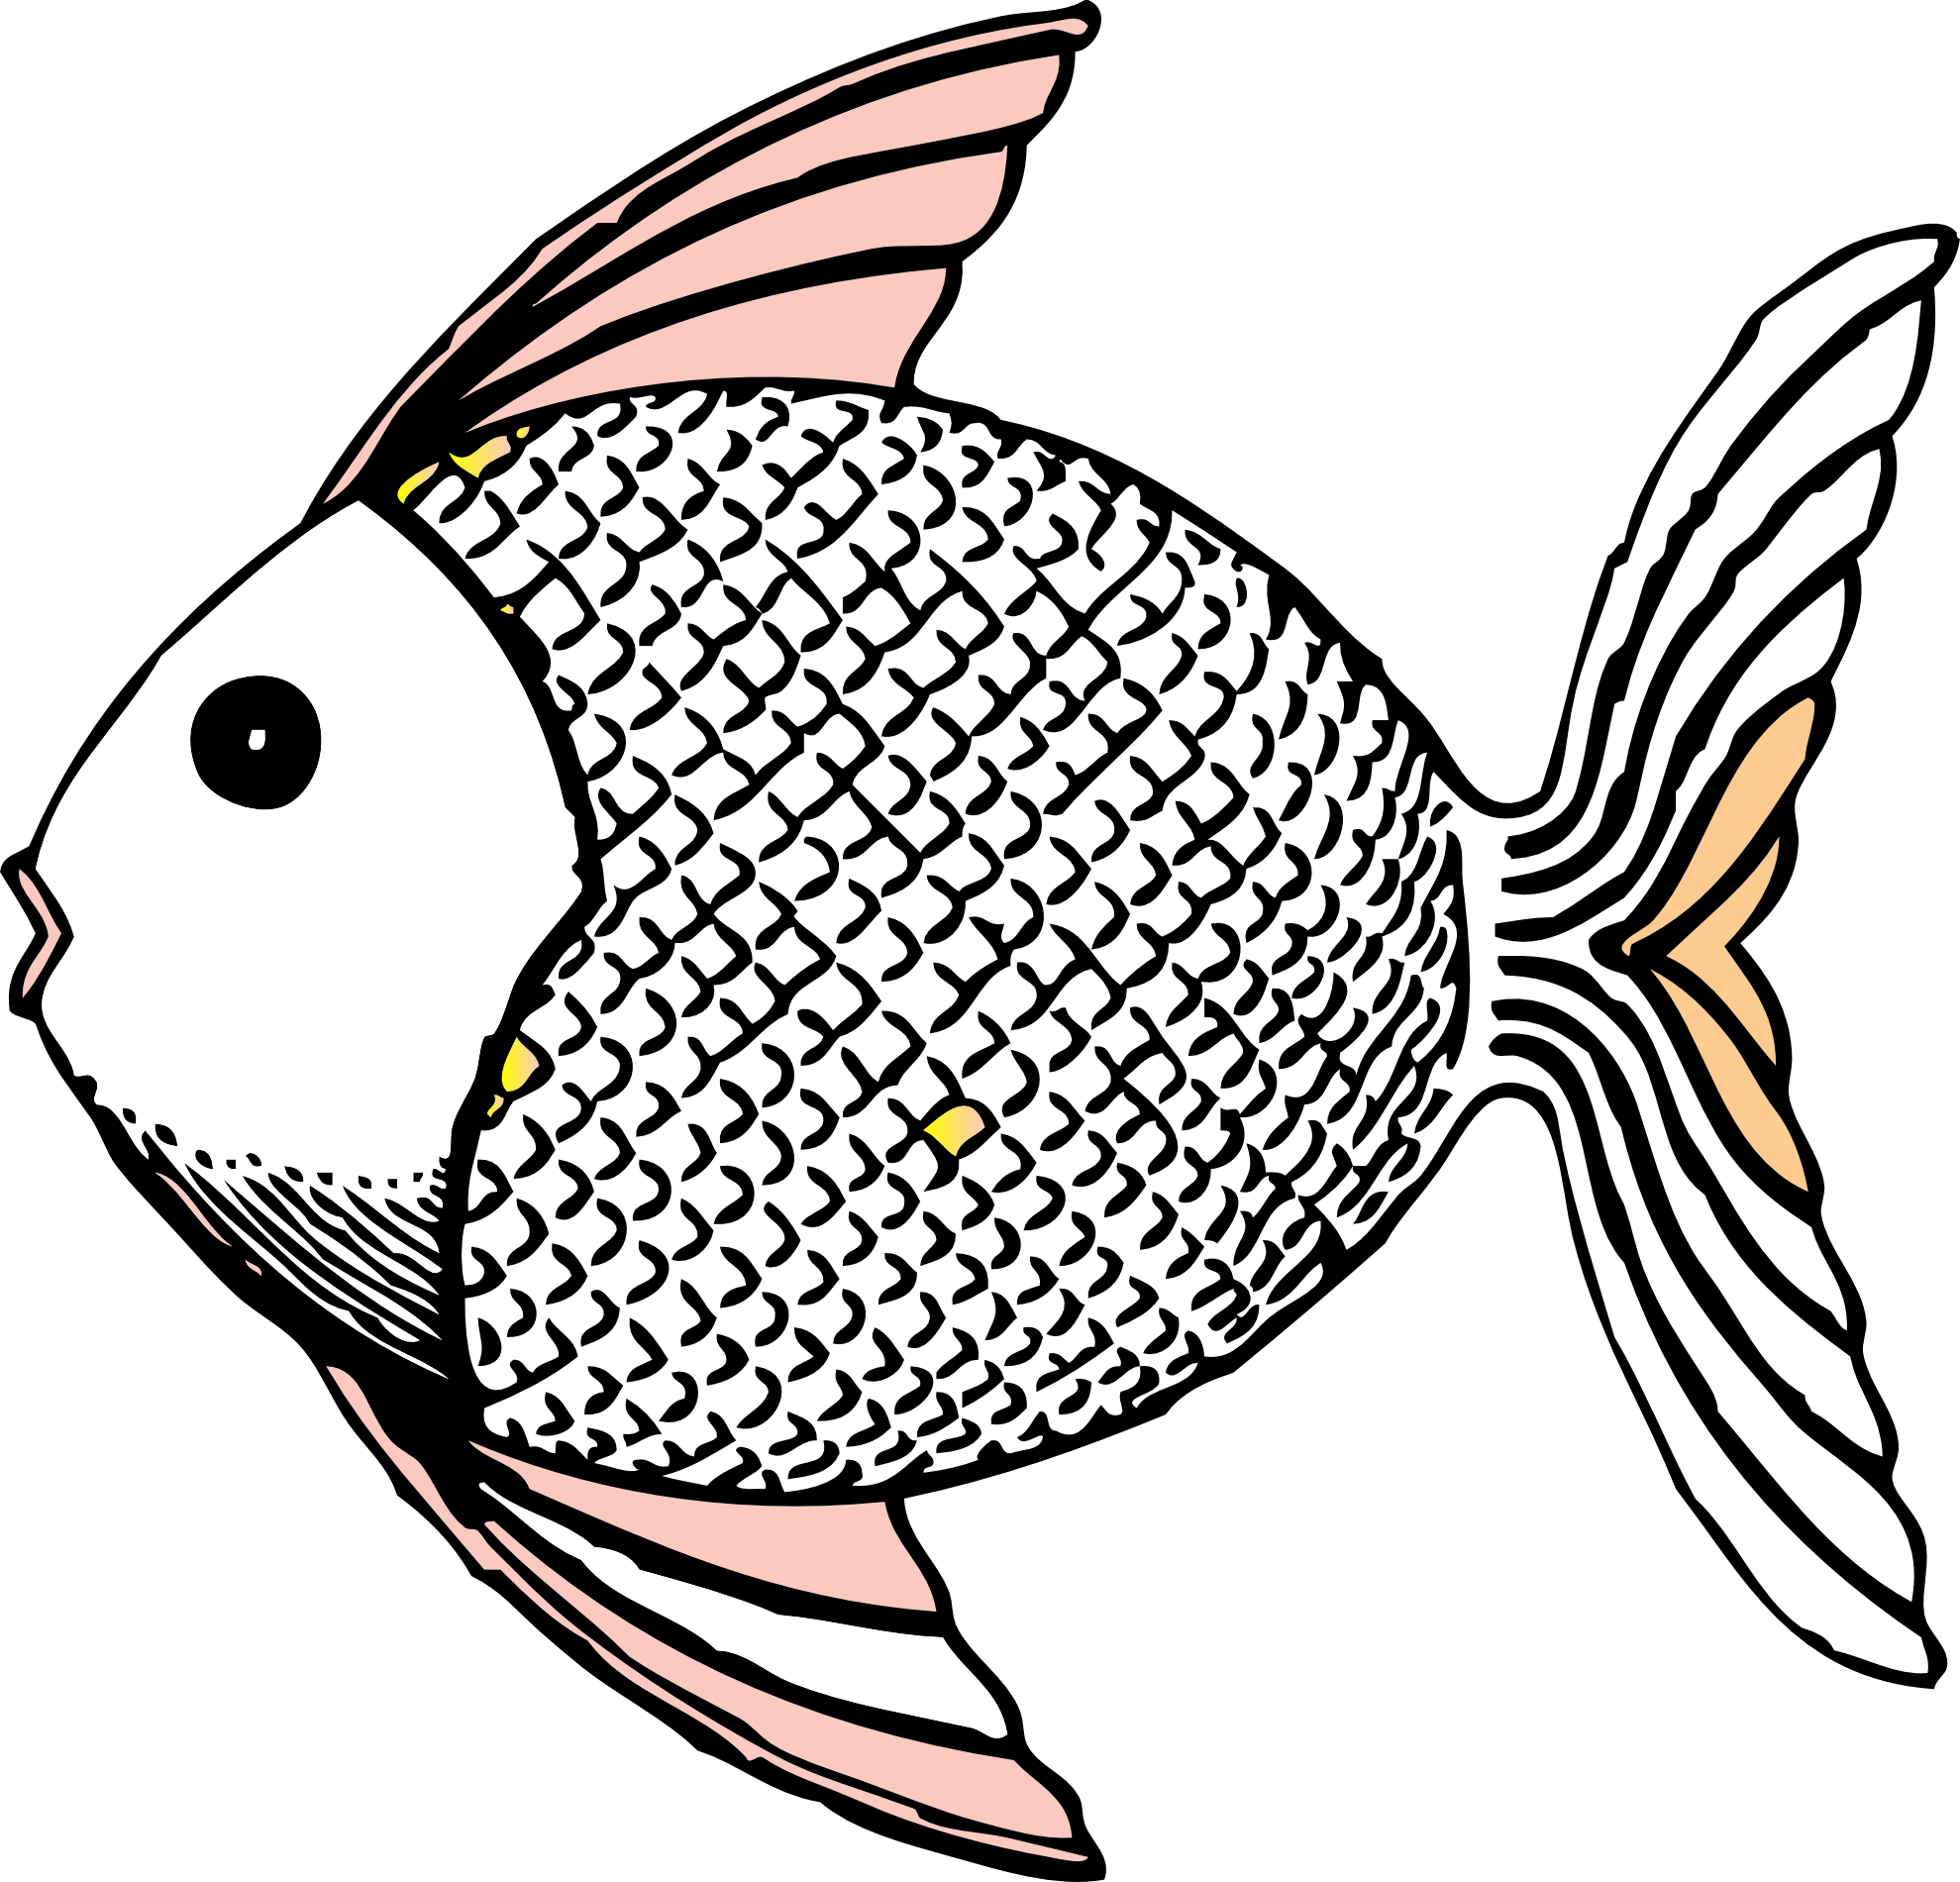 Black And White Fish Drawings - Clipart library